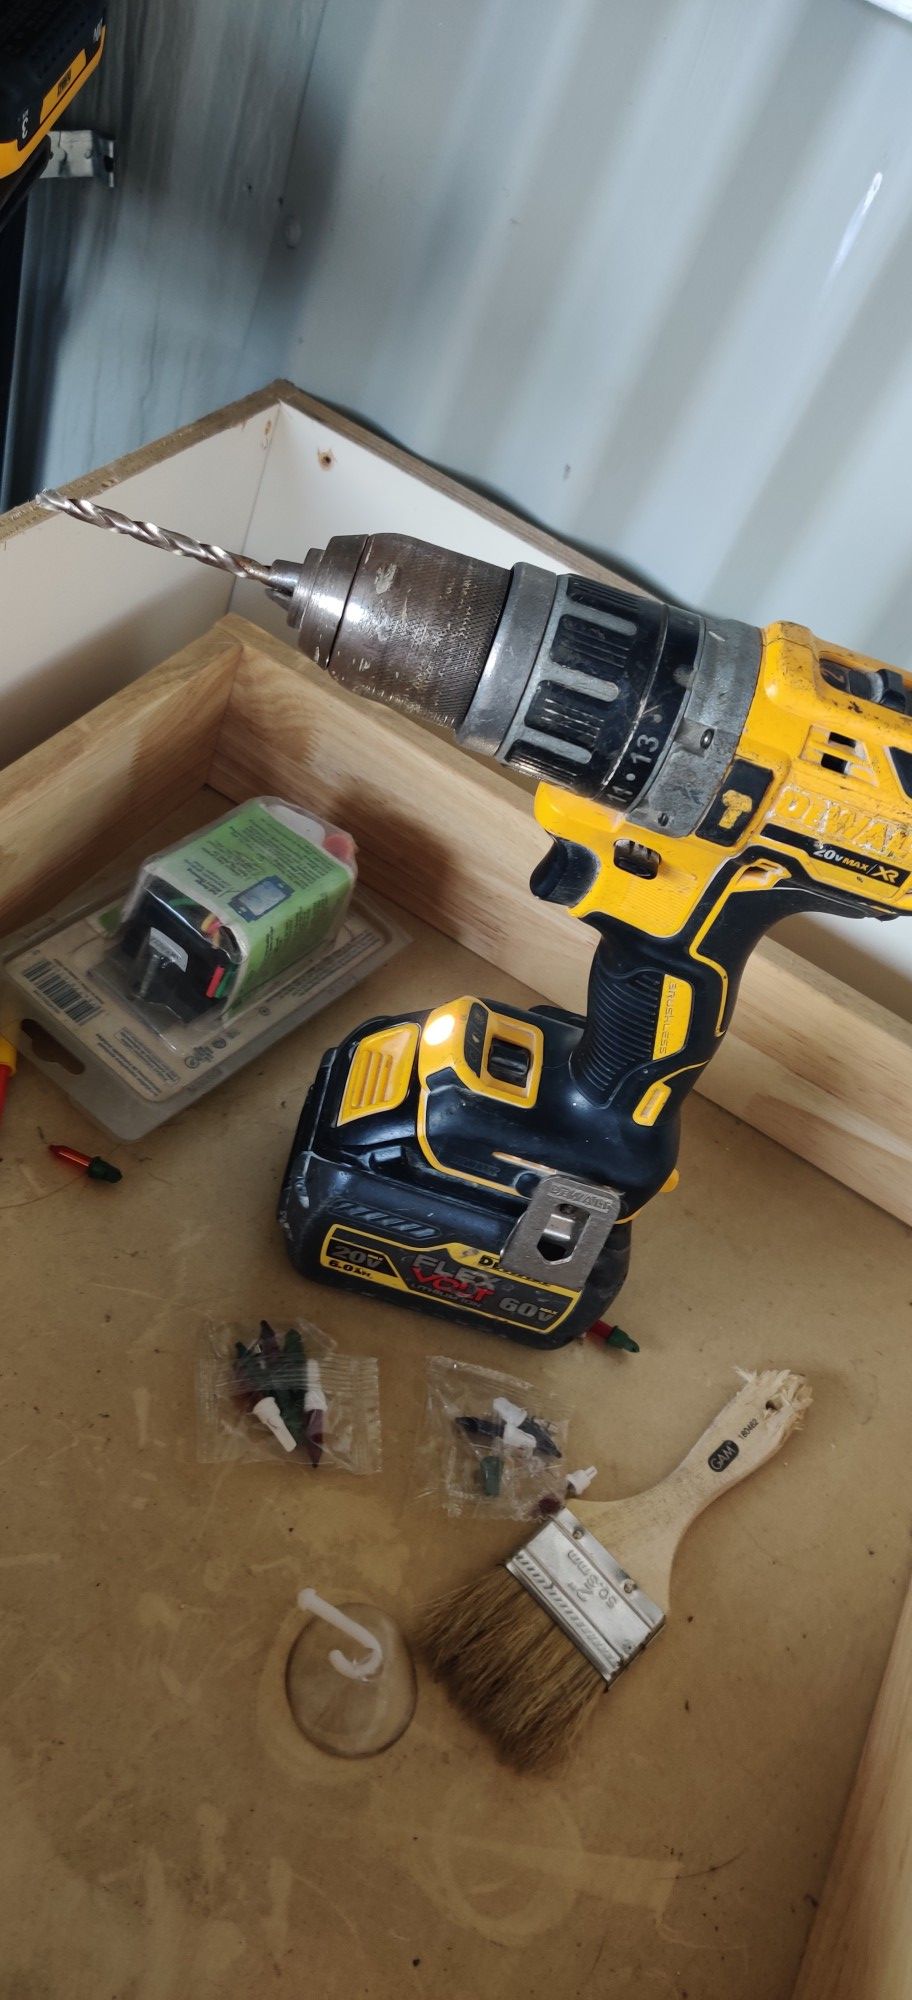 DeWalt 20 amp drill and baterie